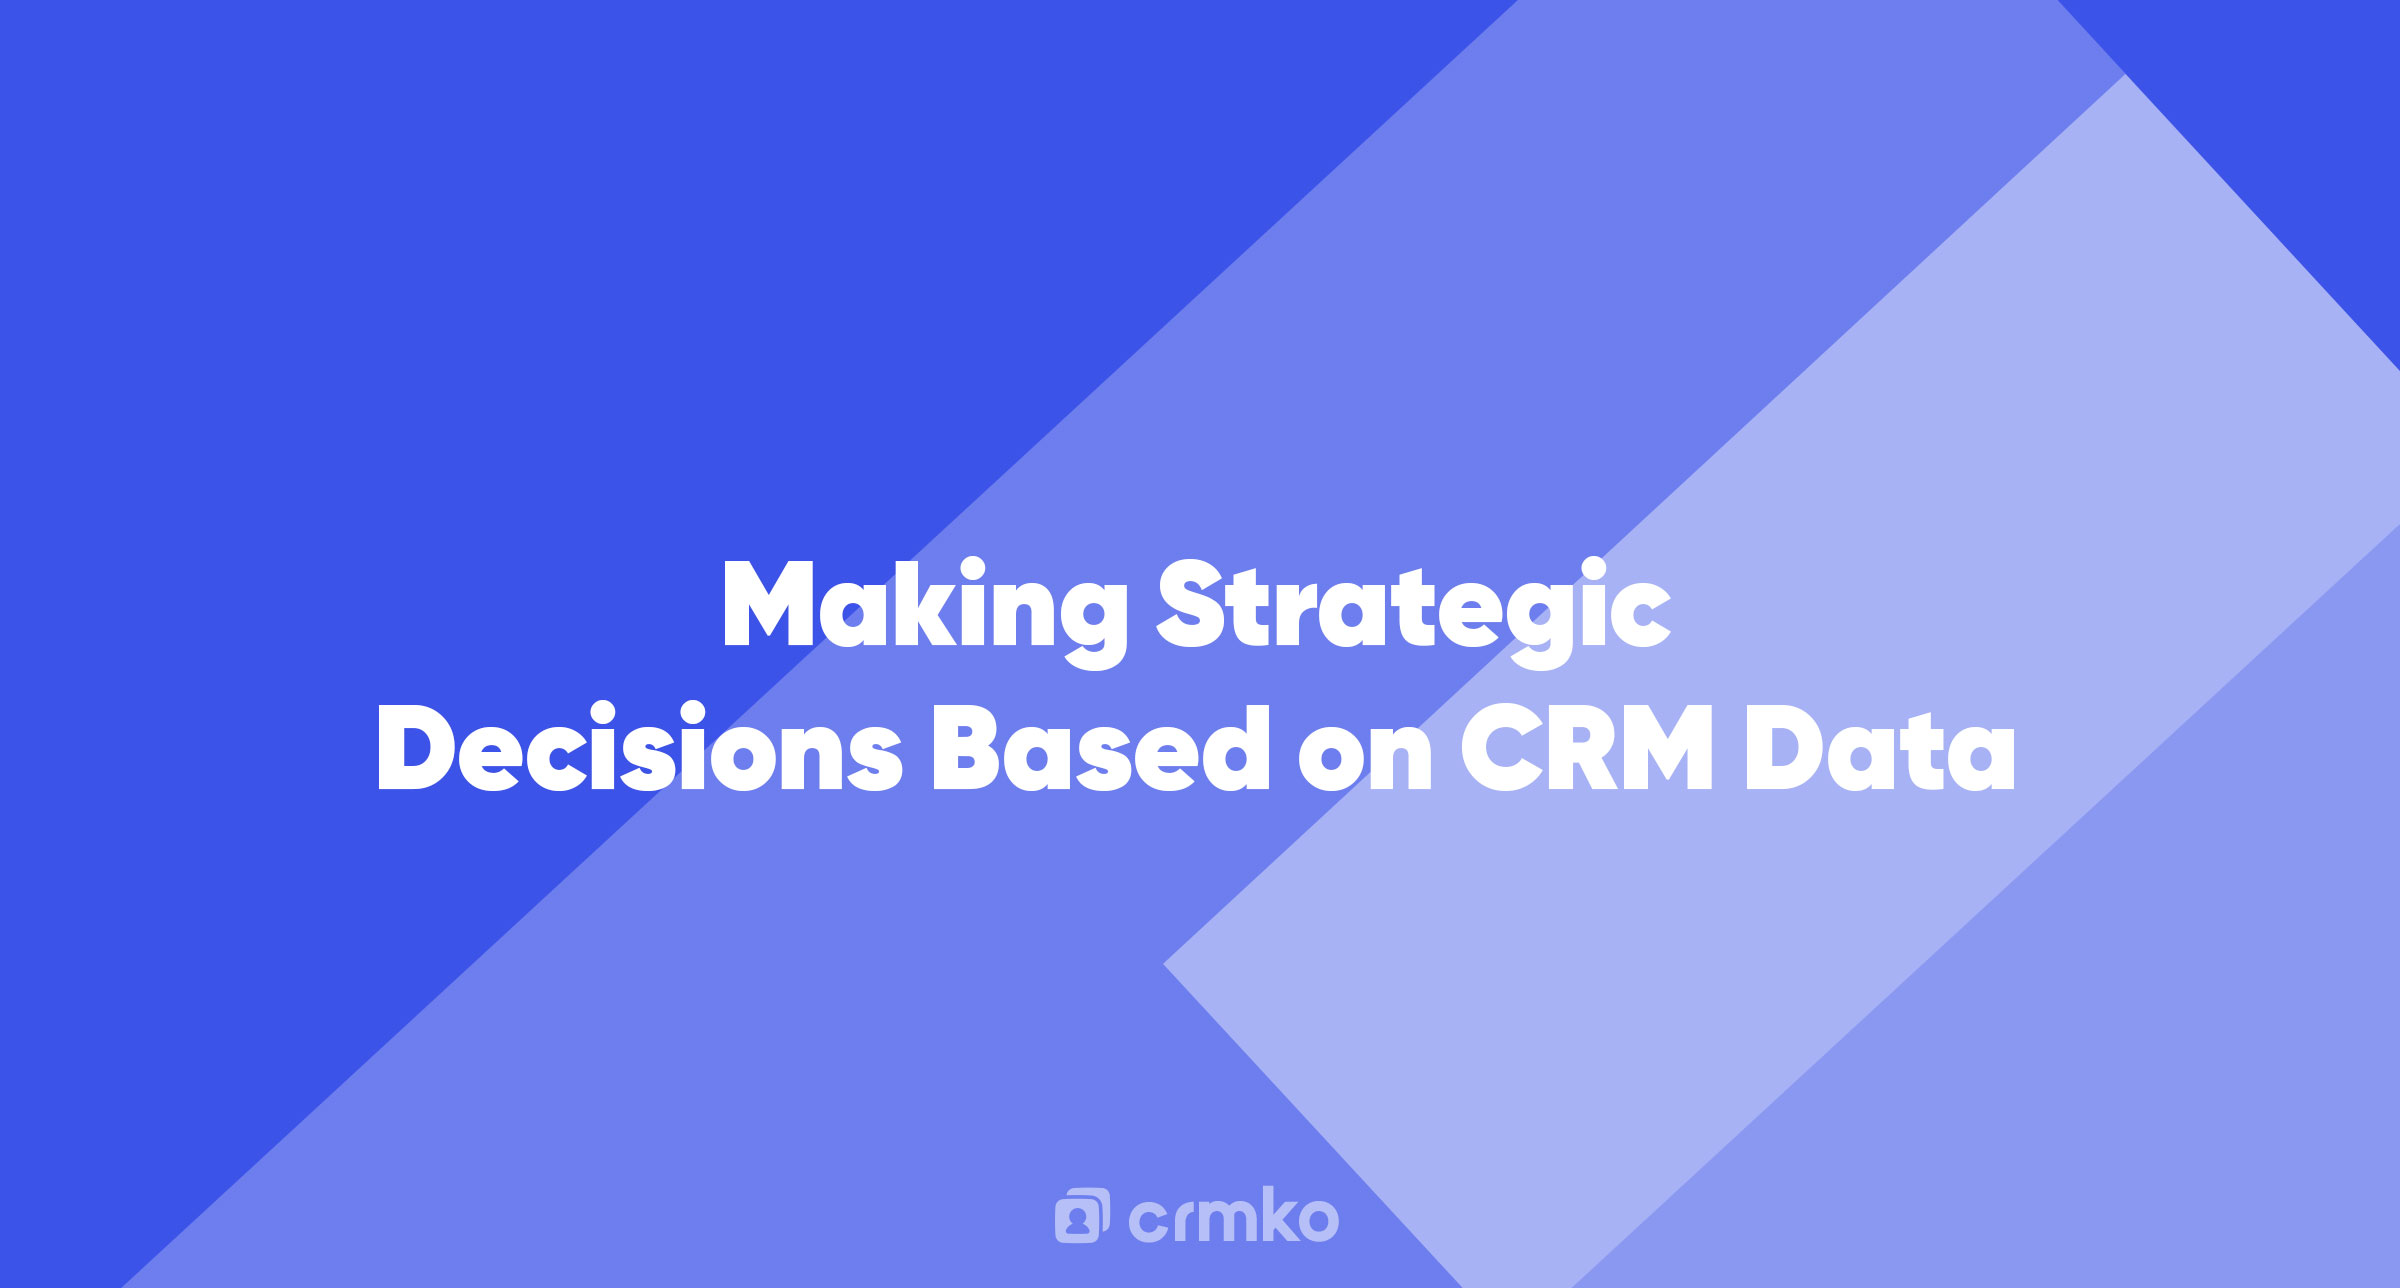 Article | Making Strategic Decisions Based on CRM Data